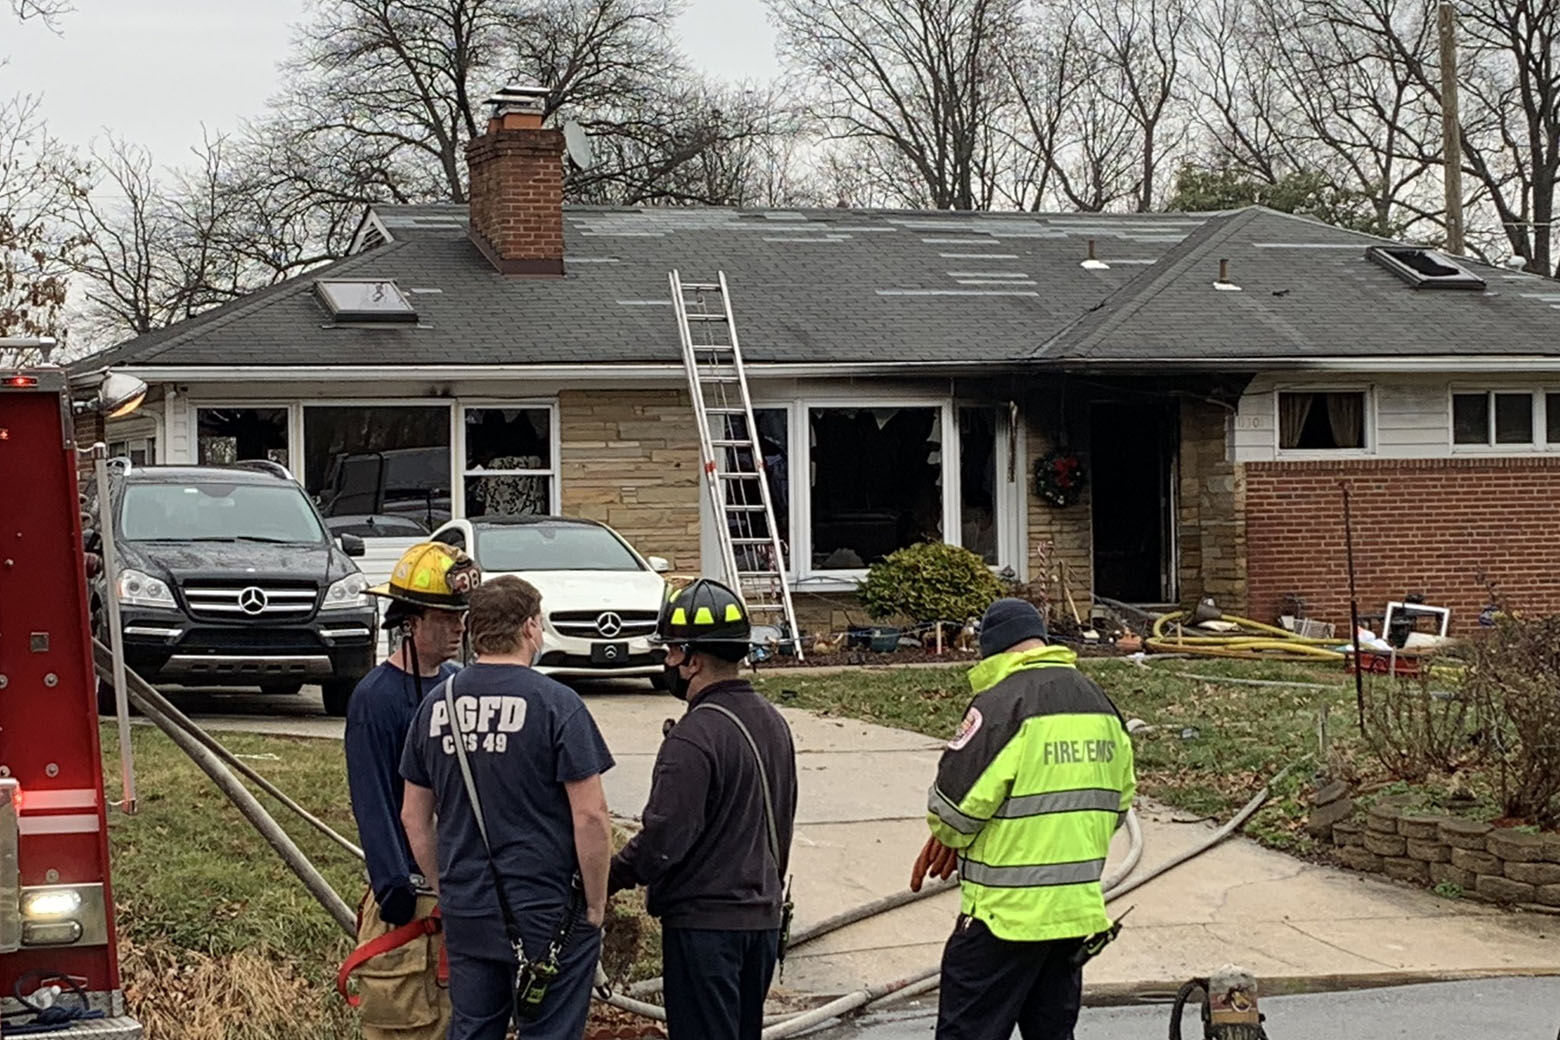 A New Year's Day house fire in Prince George's County, Maryland, sent at least one child and one adult to the hospital with serious injuries. (WTOP/Mike Murillo)